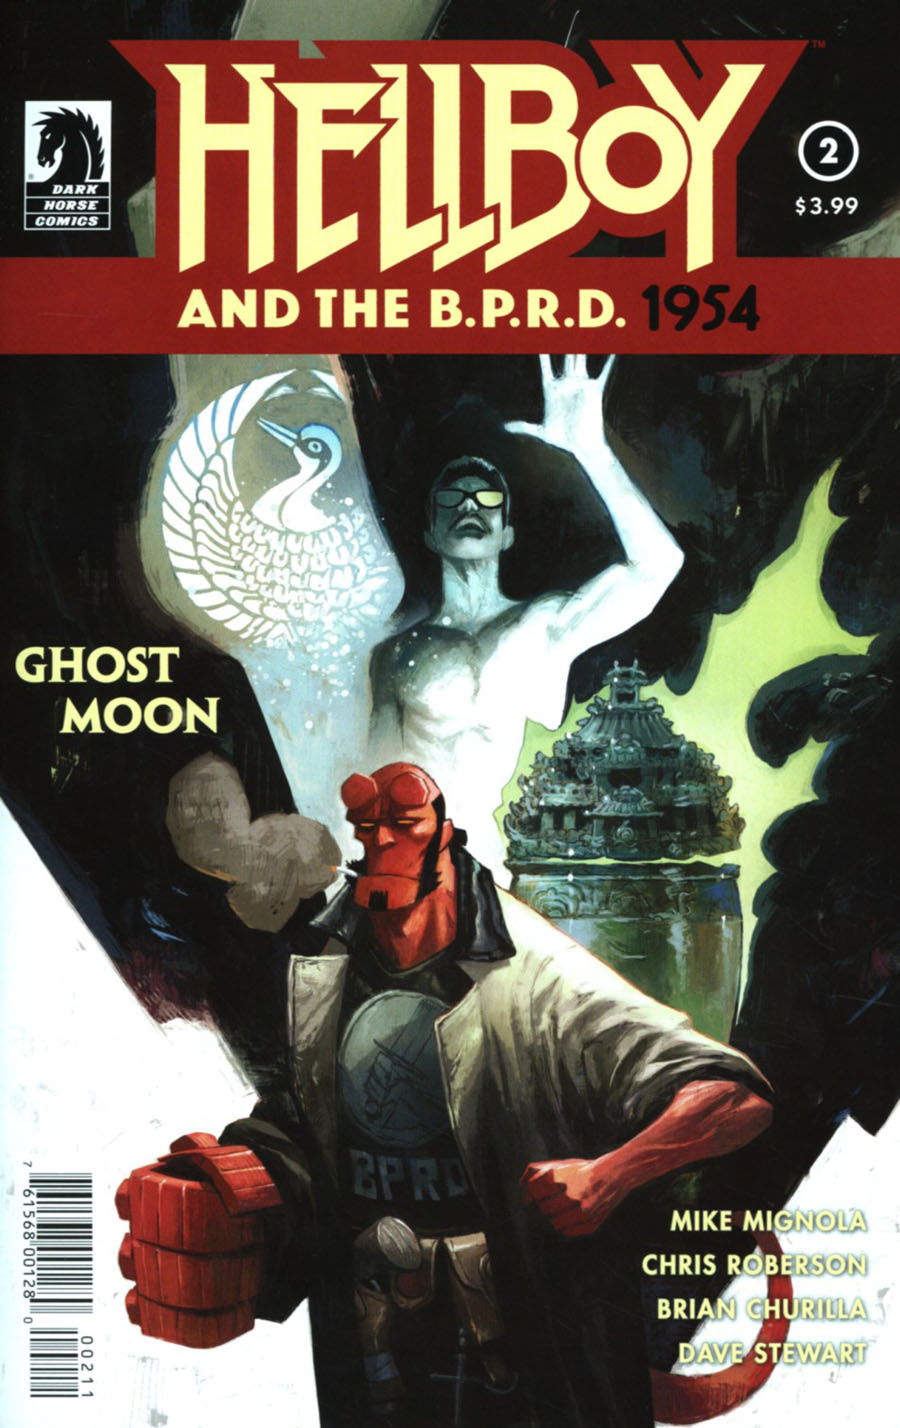 Hellboy And The BPRD 1954 Ghost Moon #2